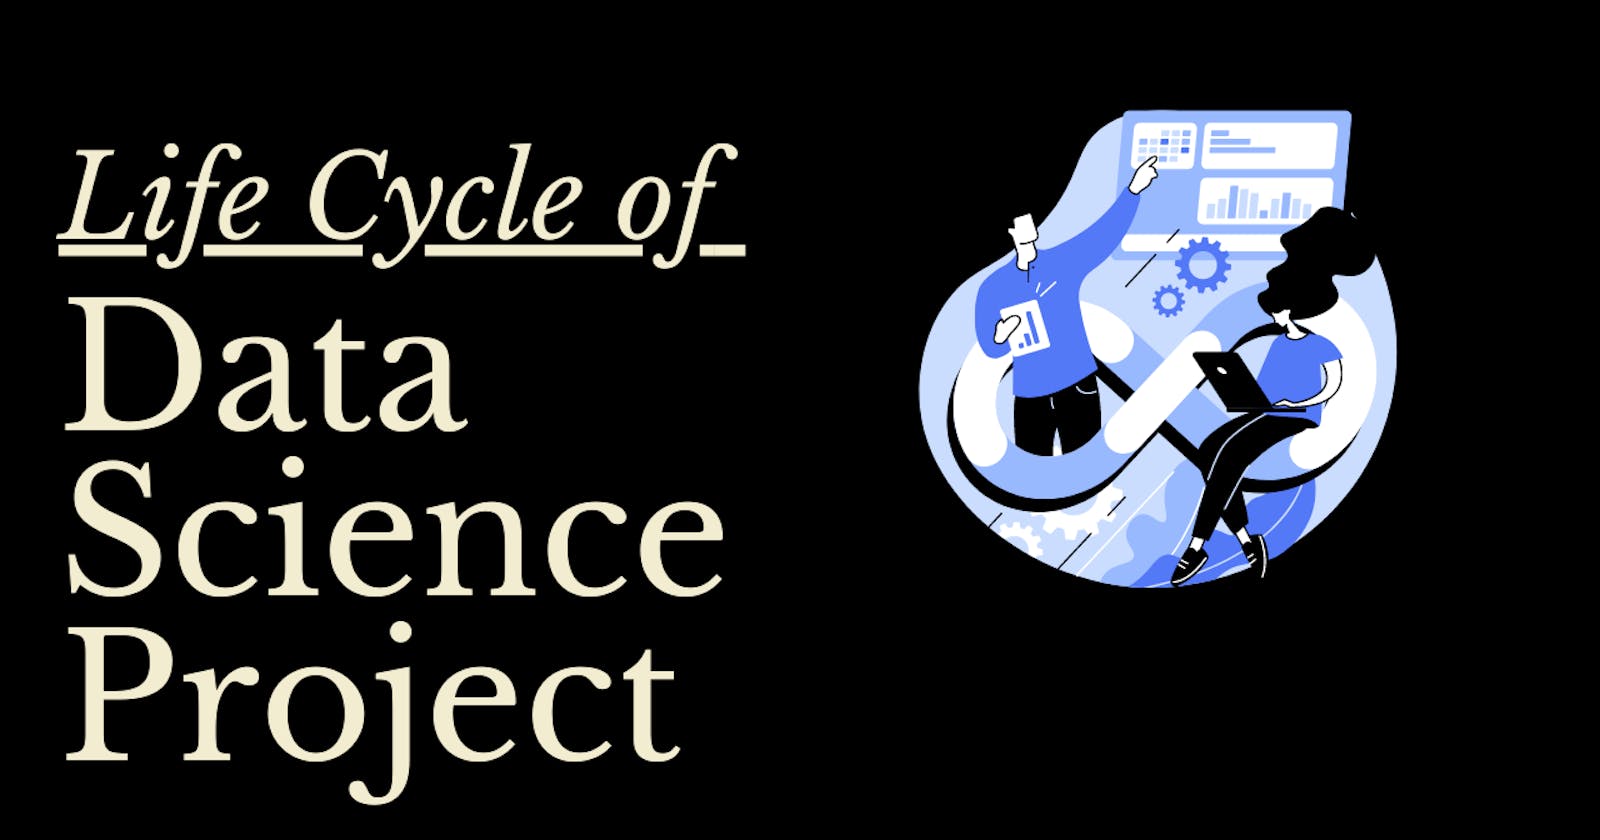 Lifecycle of a Data Science Project?